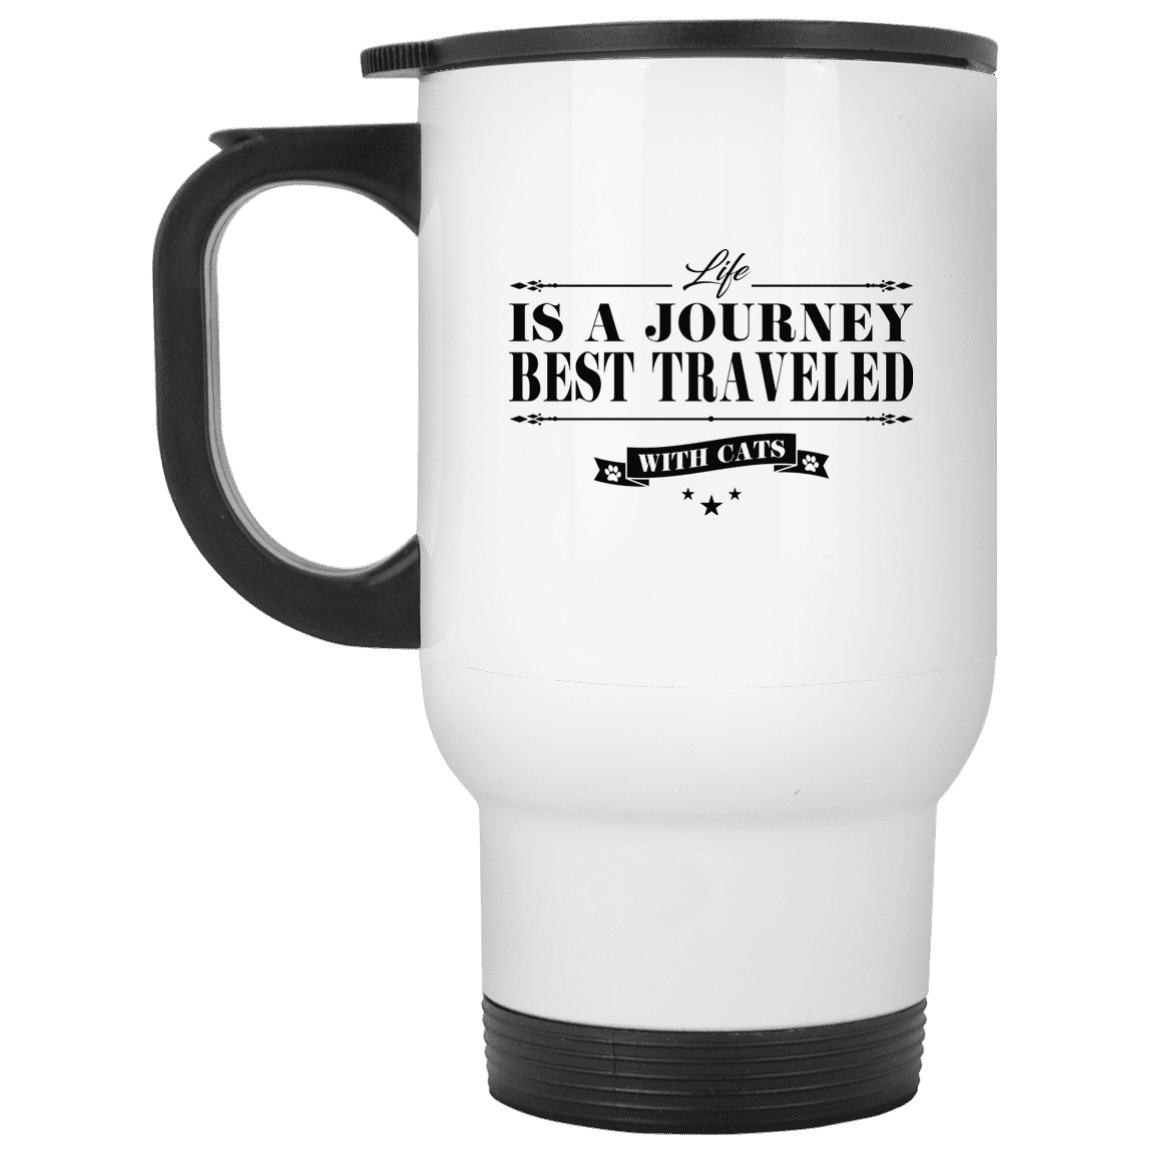 Life Is a Journey Best Travelled With Cats - Mugs.